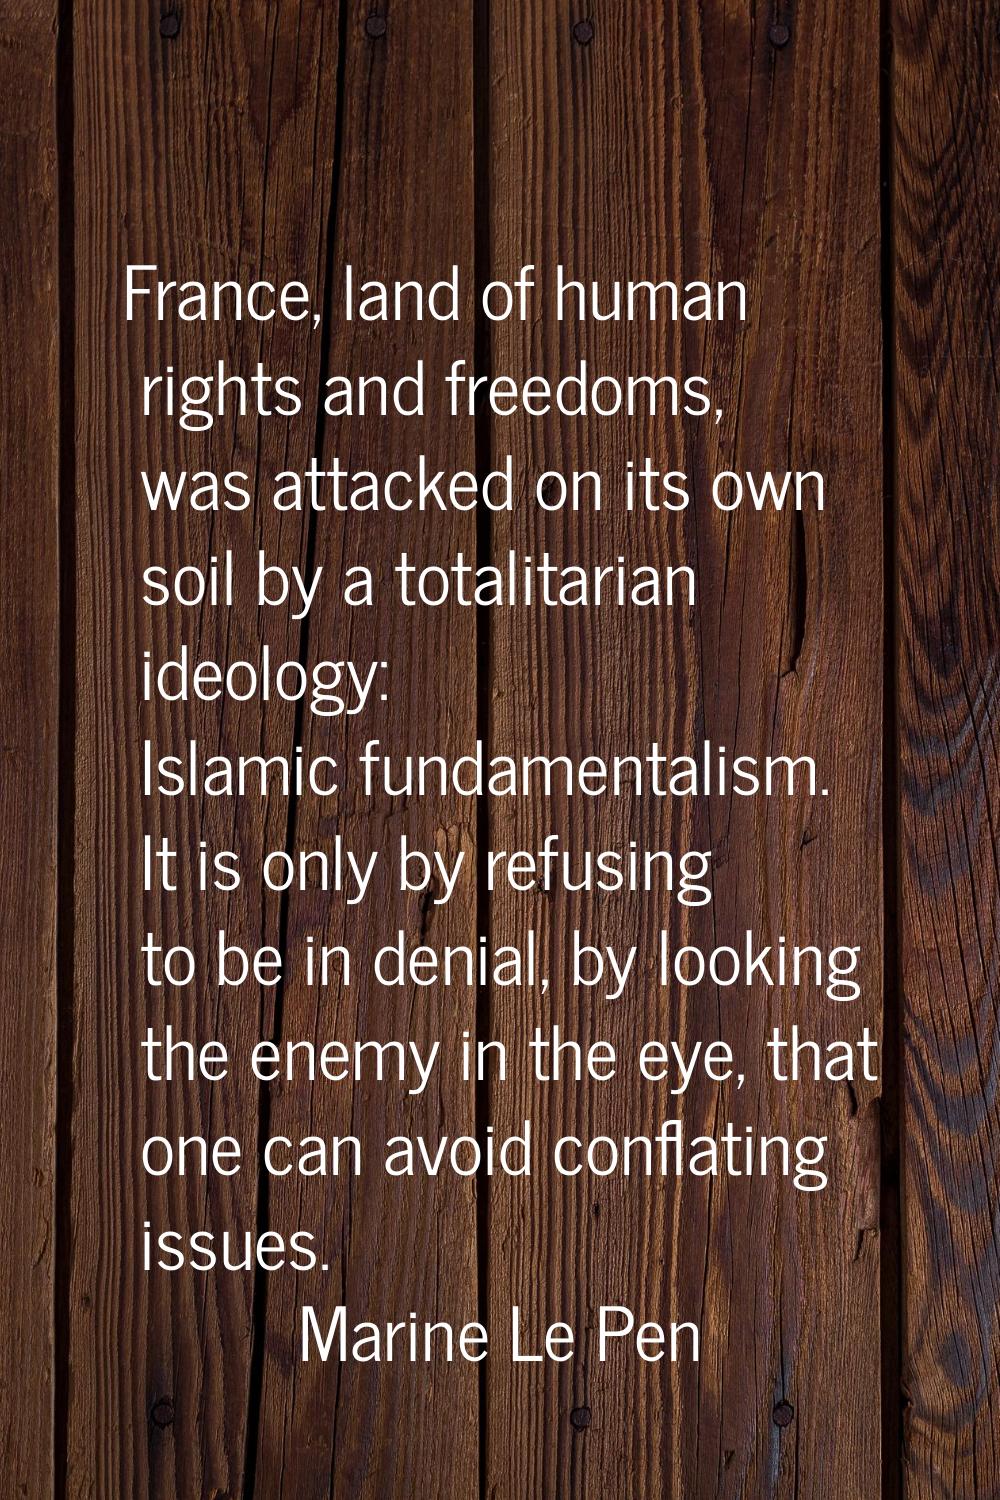 France, land of human rights and freedoms, was attacked on its own soil by a totalitarian ideology: